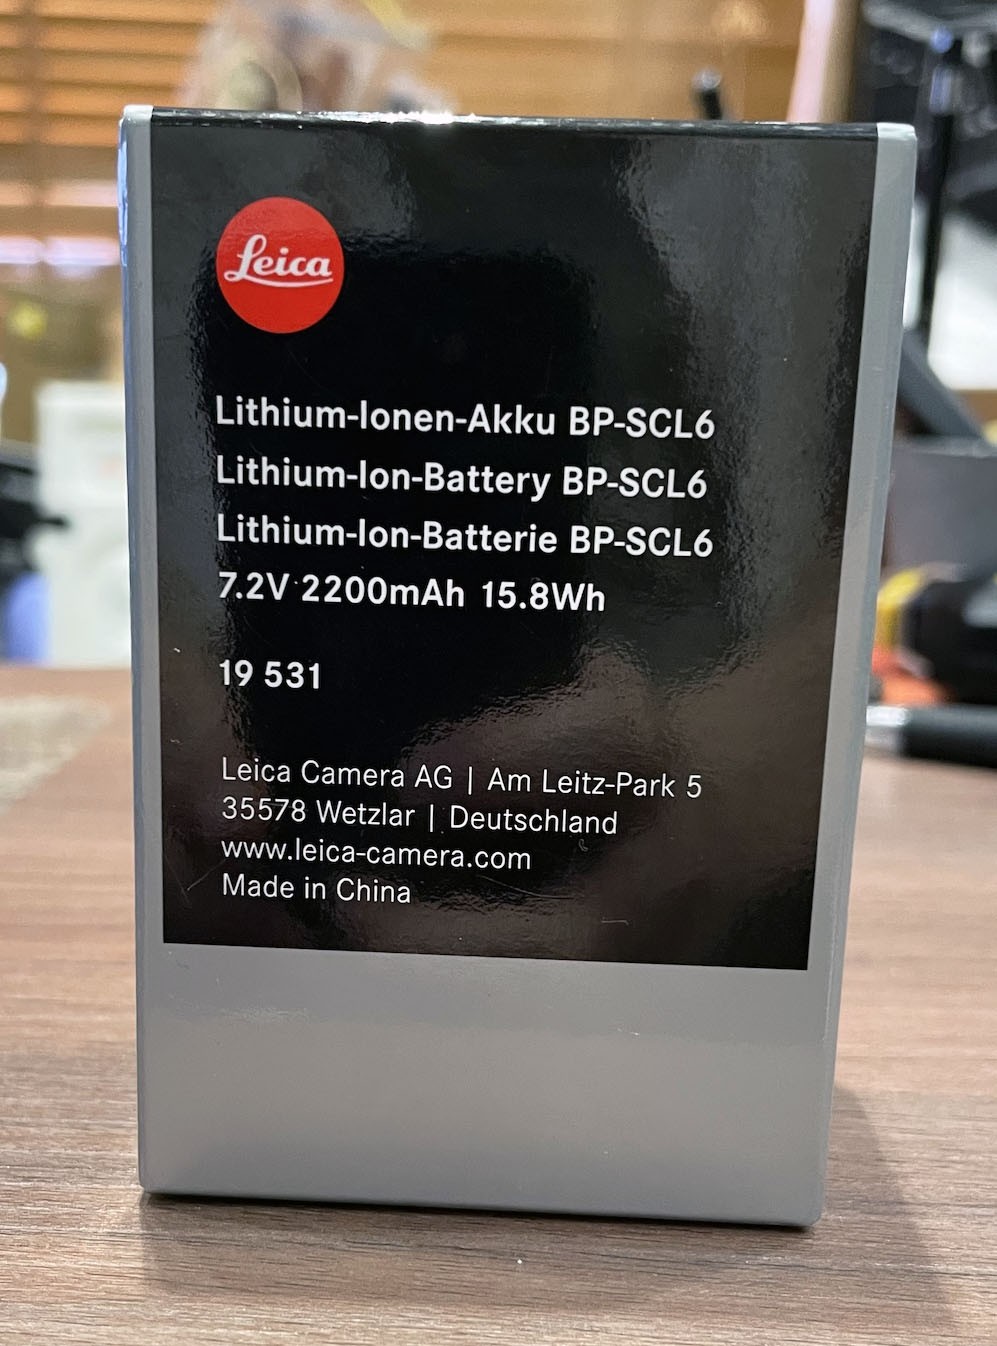 Leica Lithium-Ion Battery Battery BP-SCL6 for Q3 (19531) - meteor